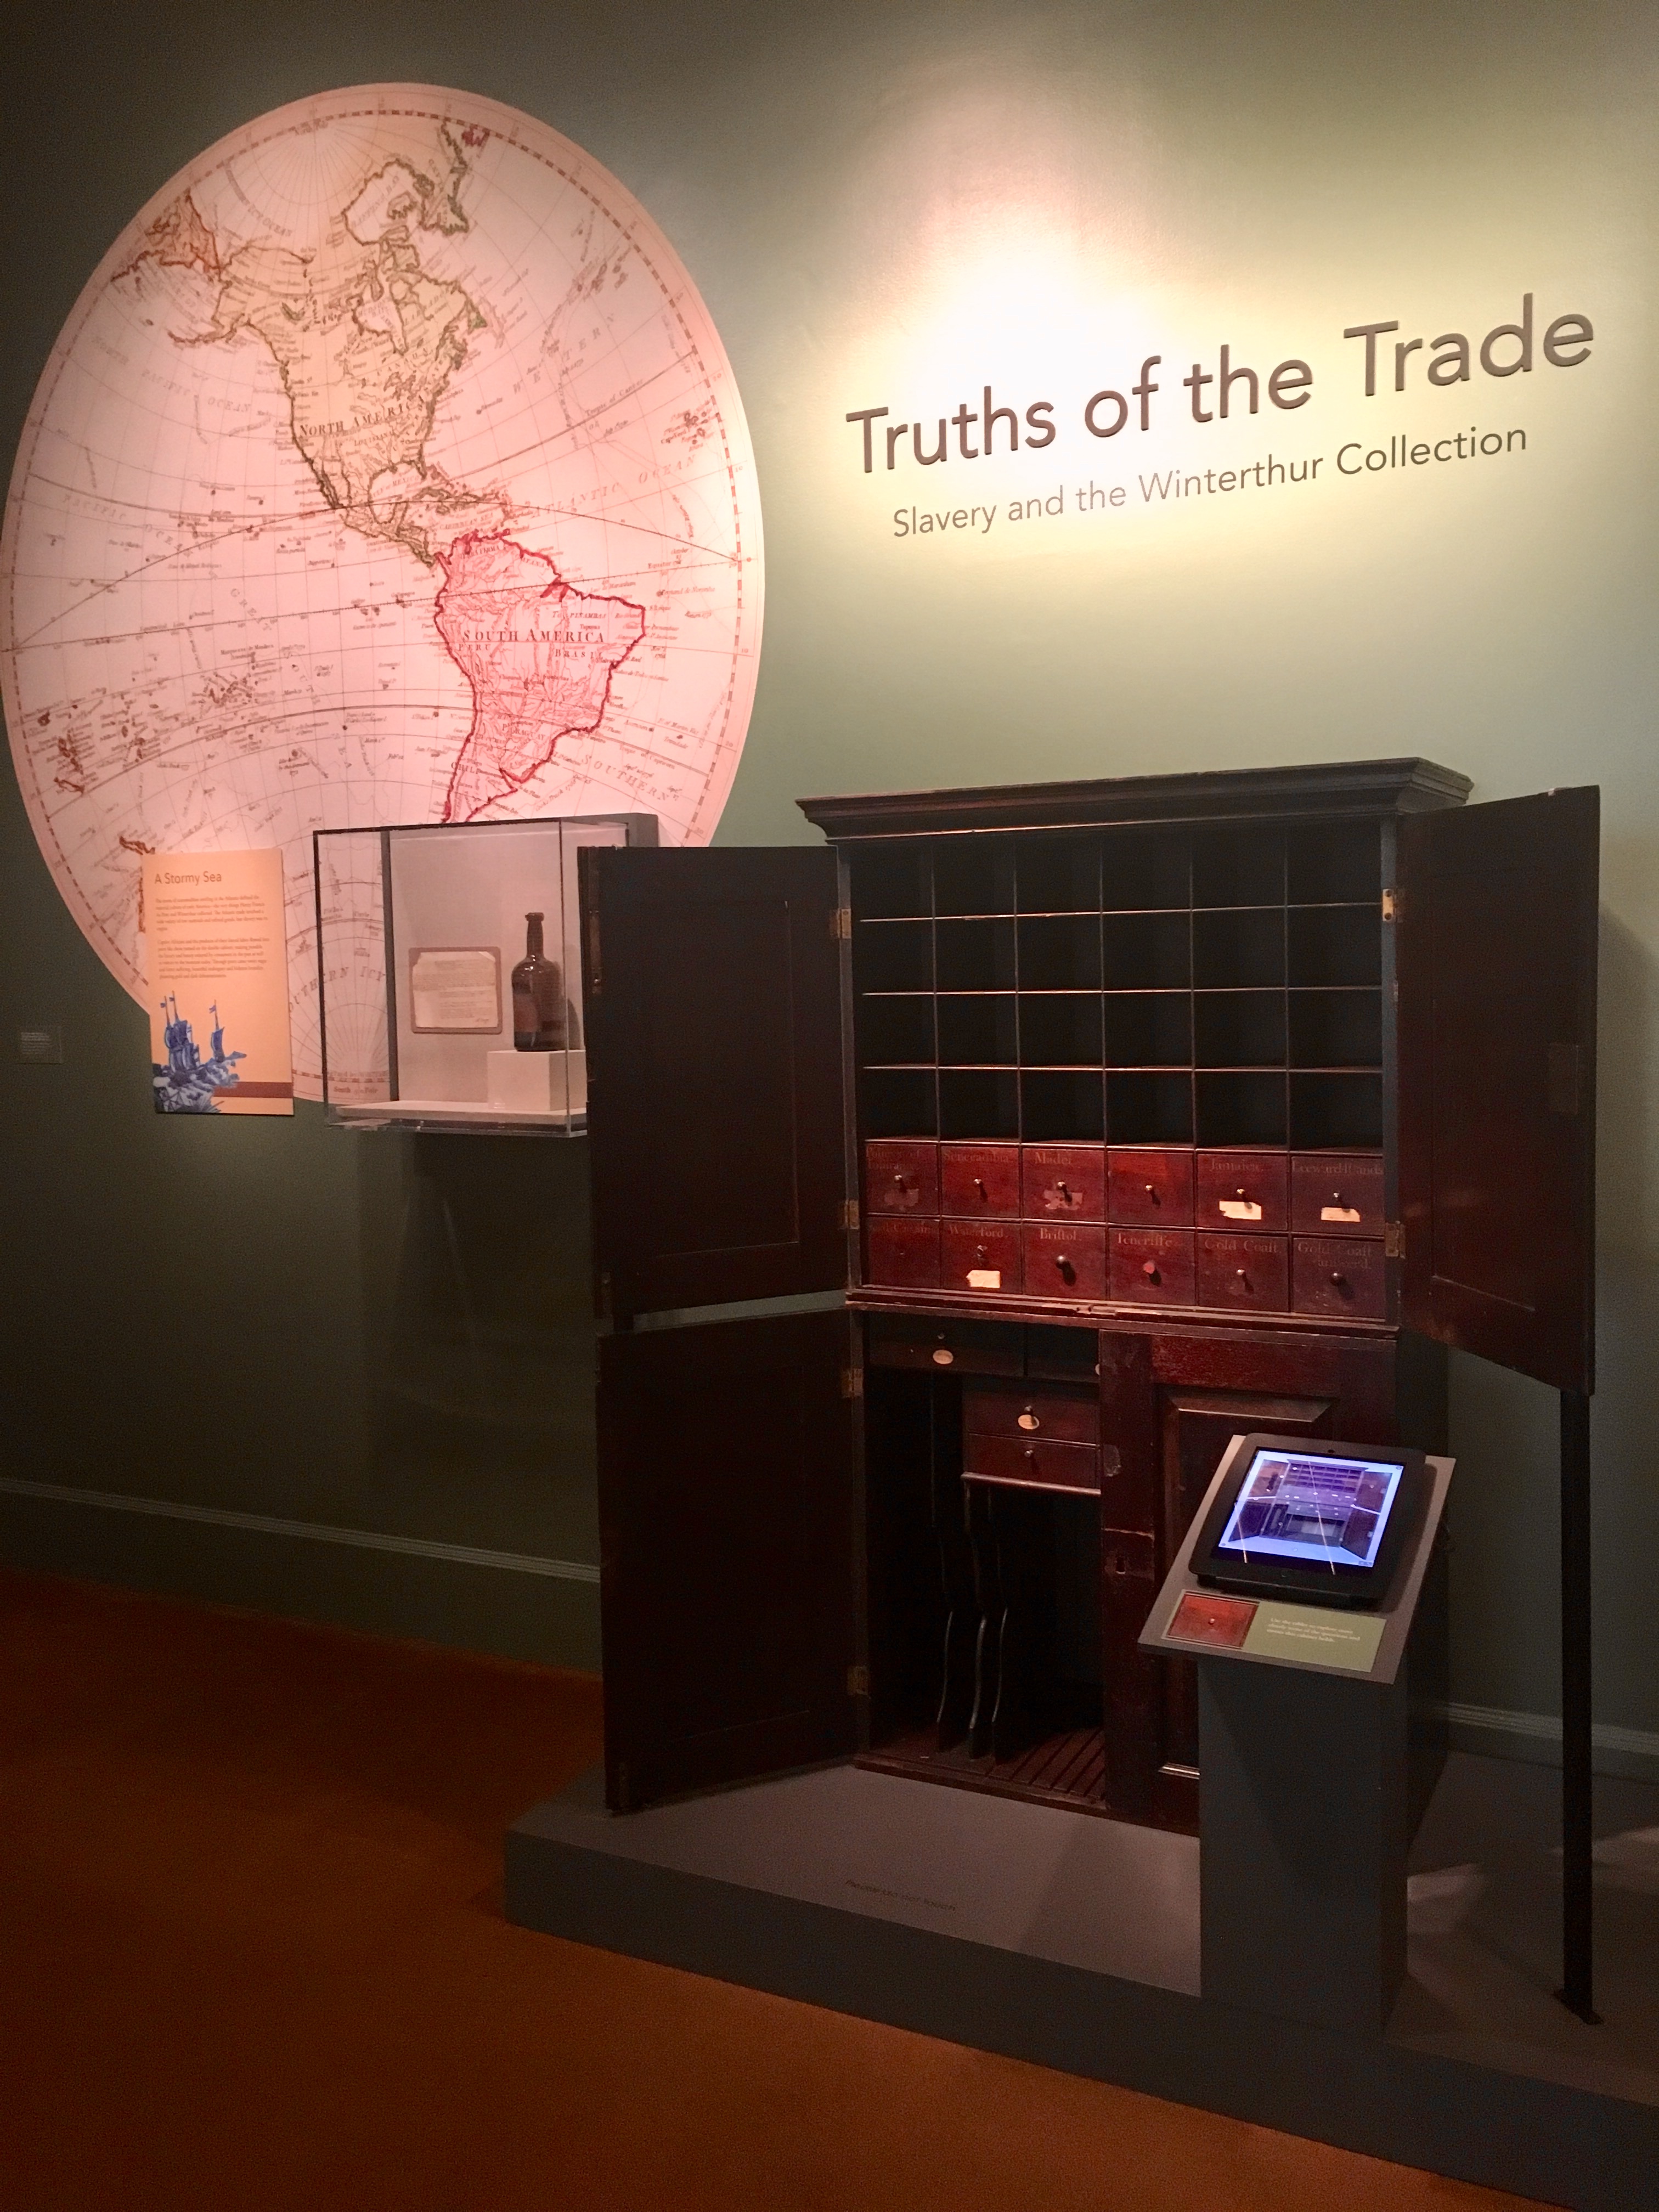 A view inside the Truths of the Trade exhibit featuring the mahogany double cabinet at center along with the the ipad touch screen interactive in the front.